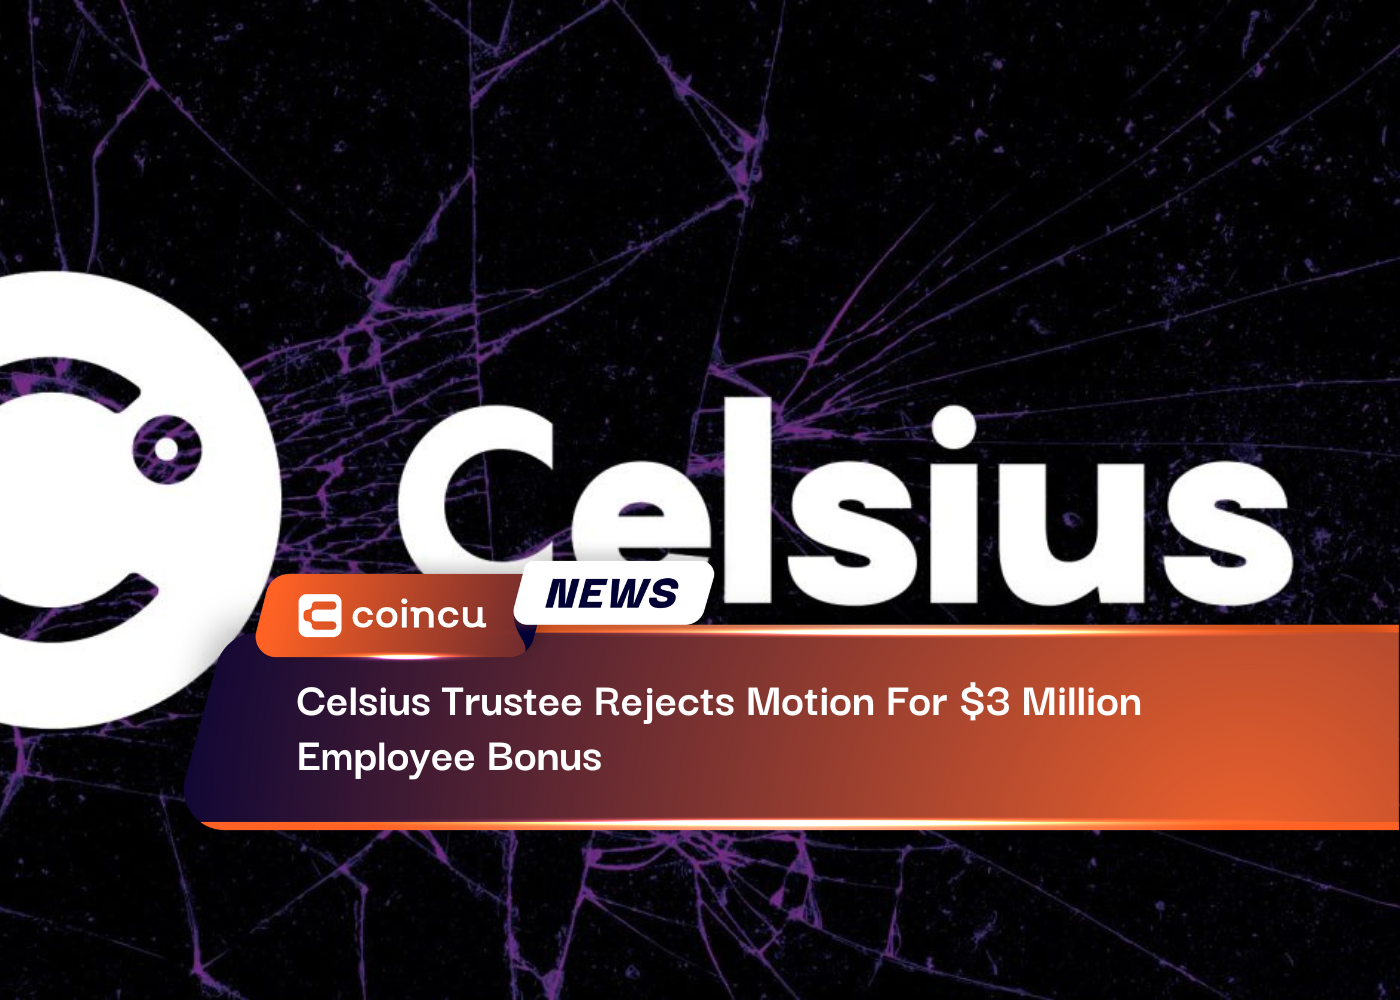 Celsius Trustee Rejects Motion For 3 Million